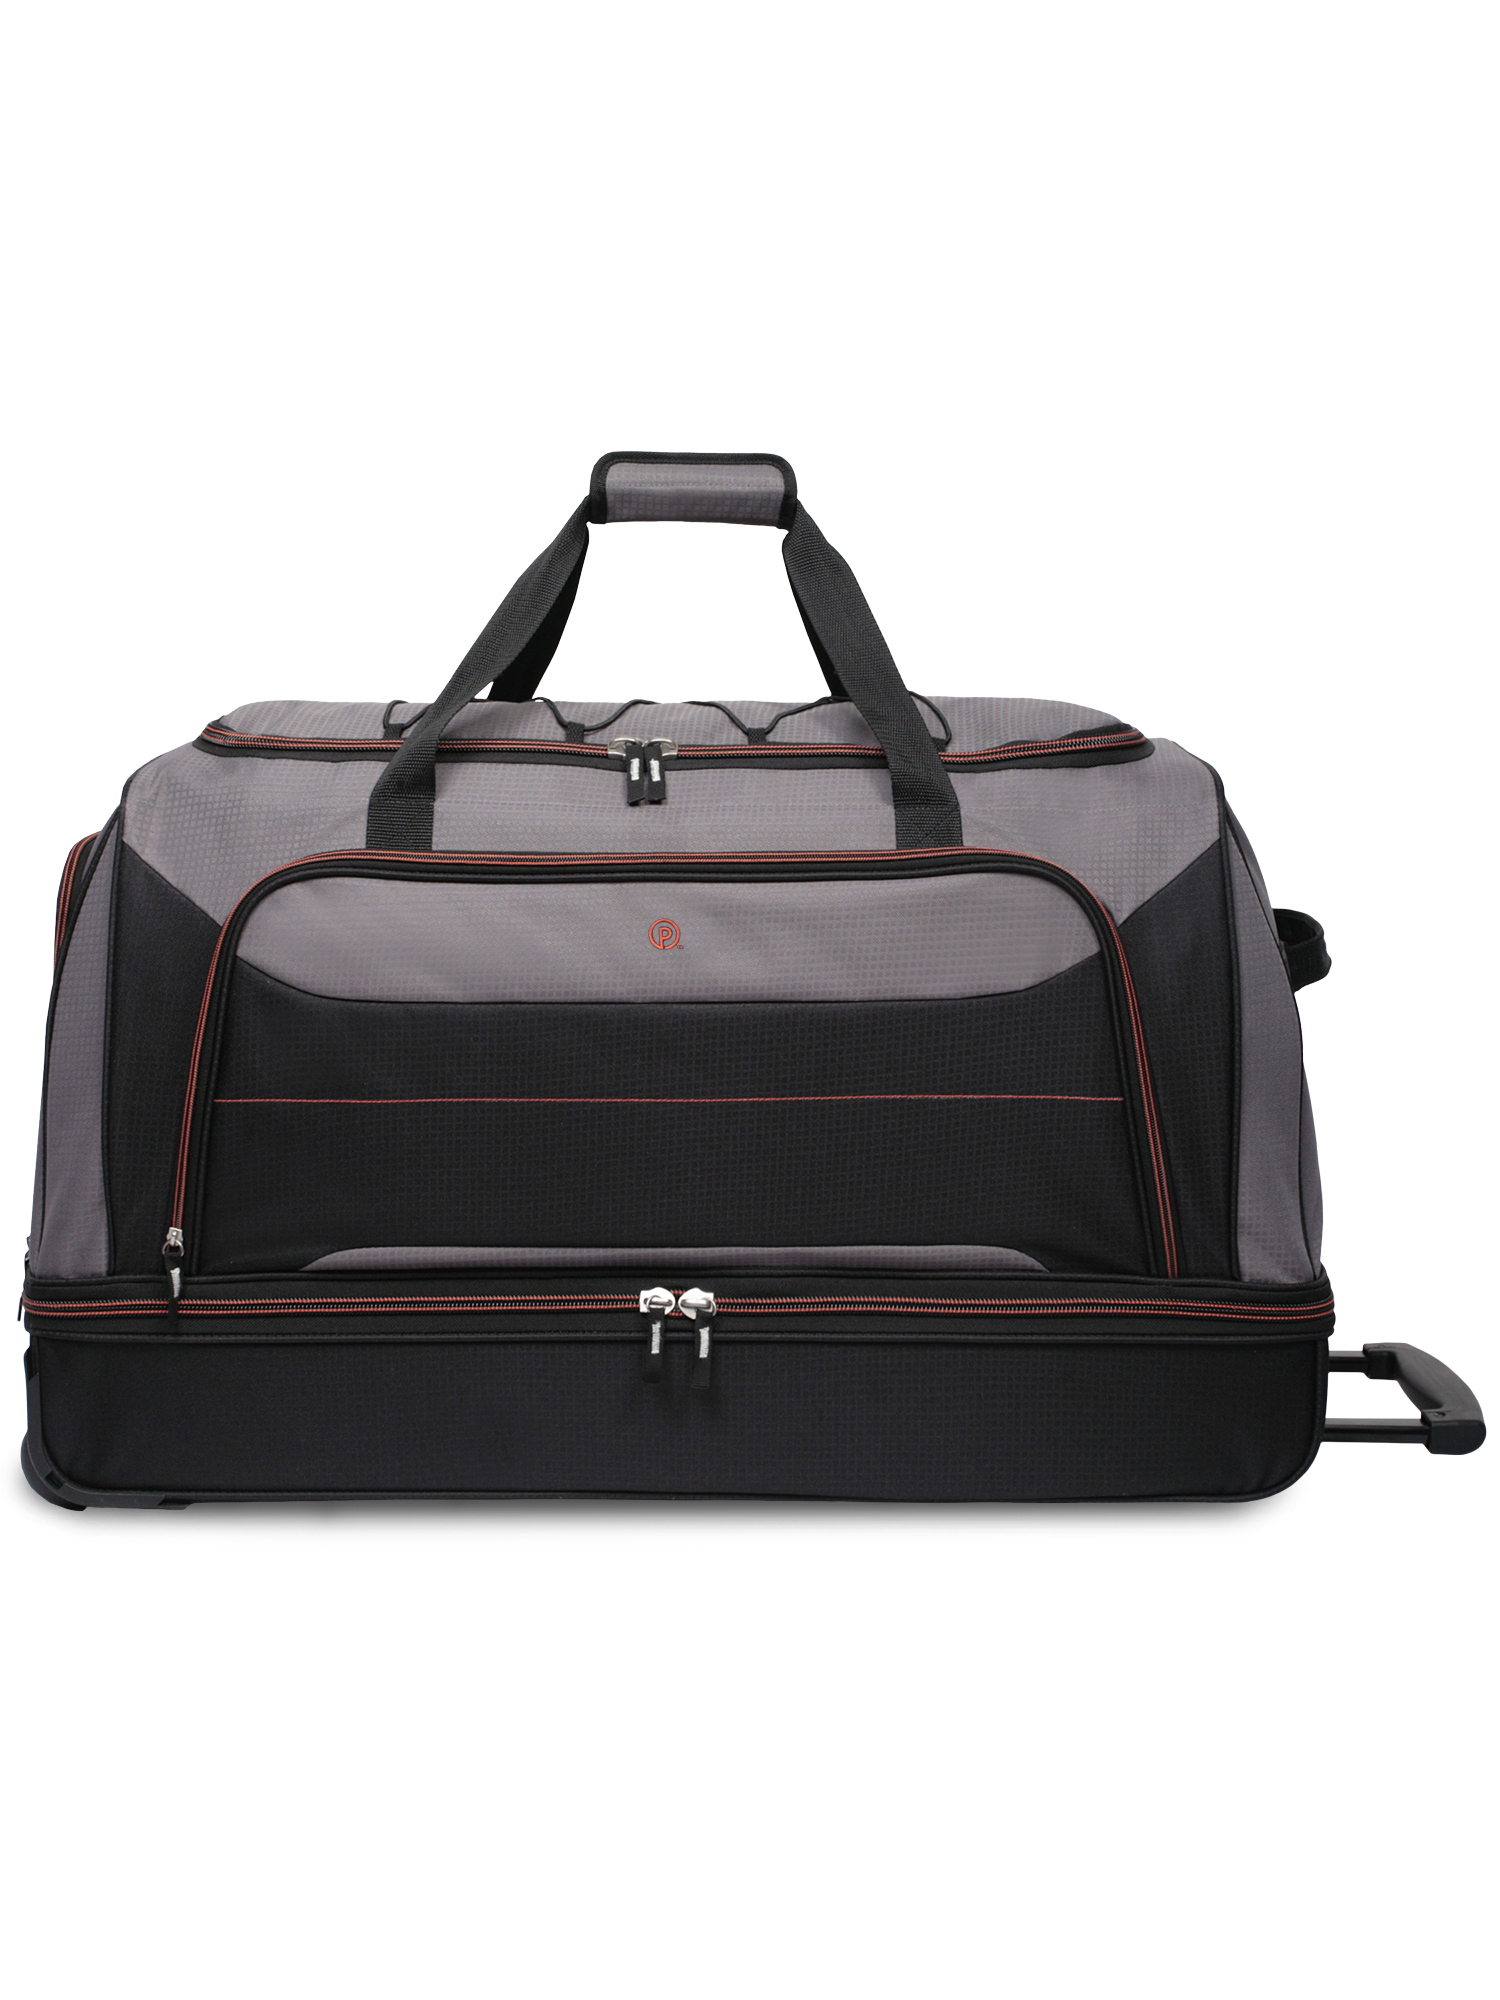 Protege Rolling Drop-Bottom Duffel Bag for Travel, 30 in, Black and Grey - image 1 of 8